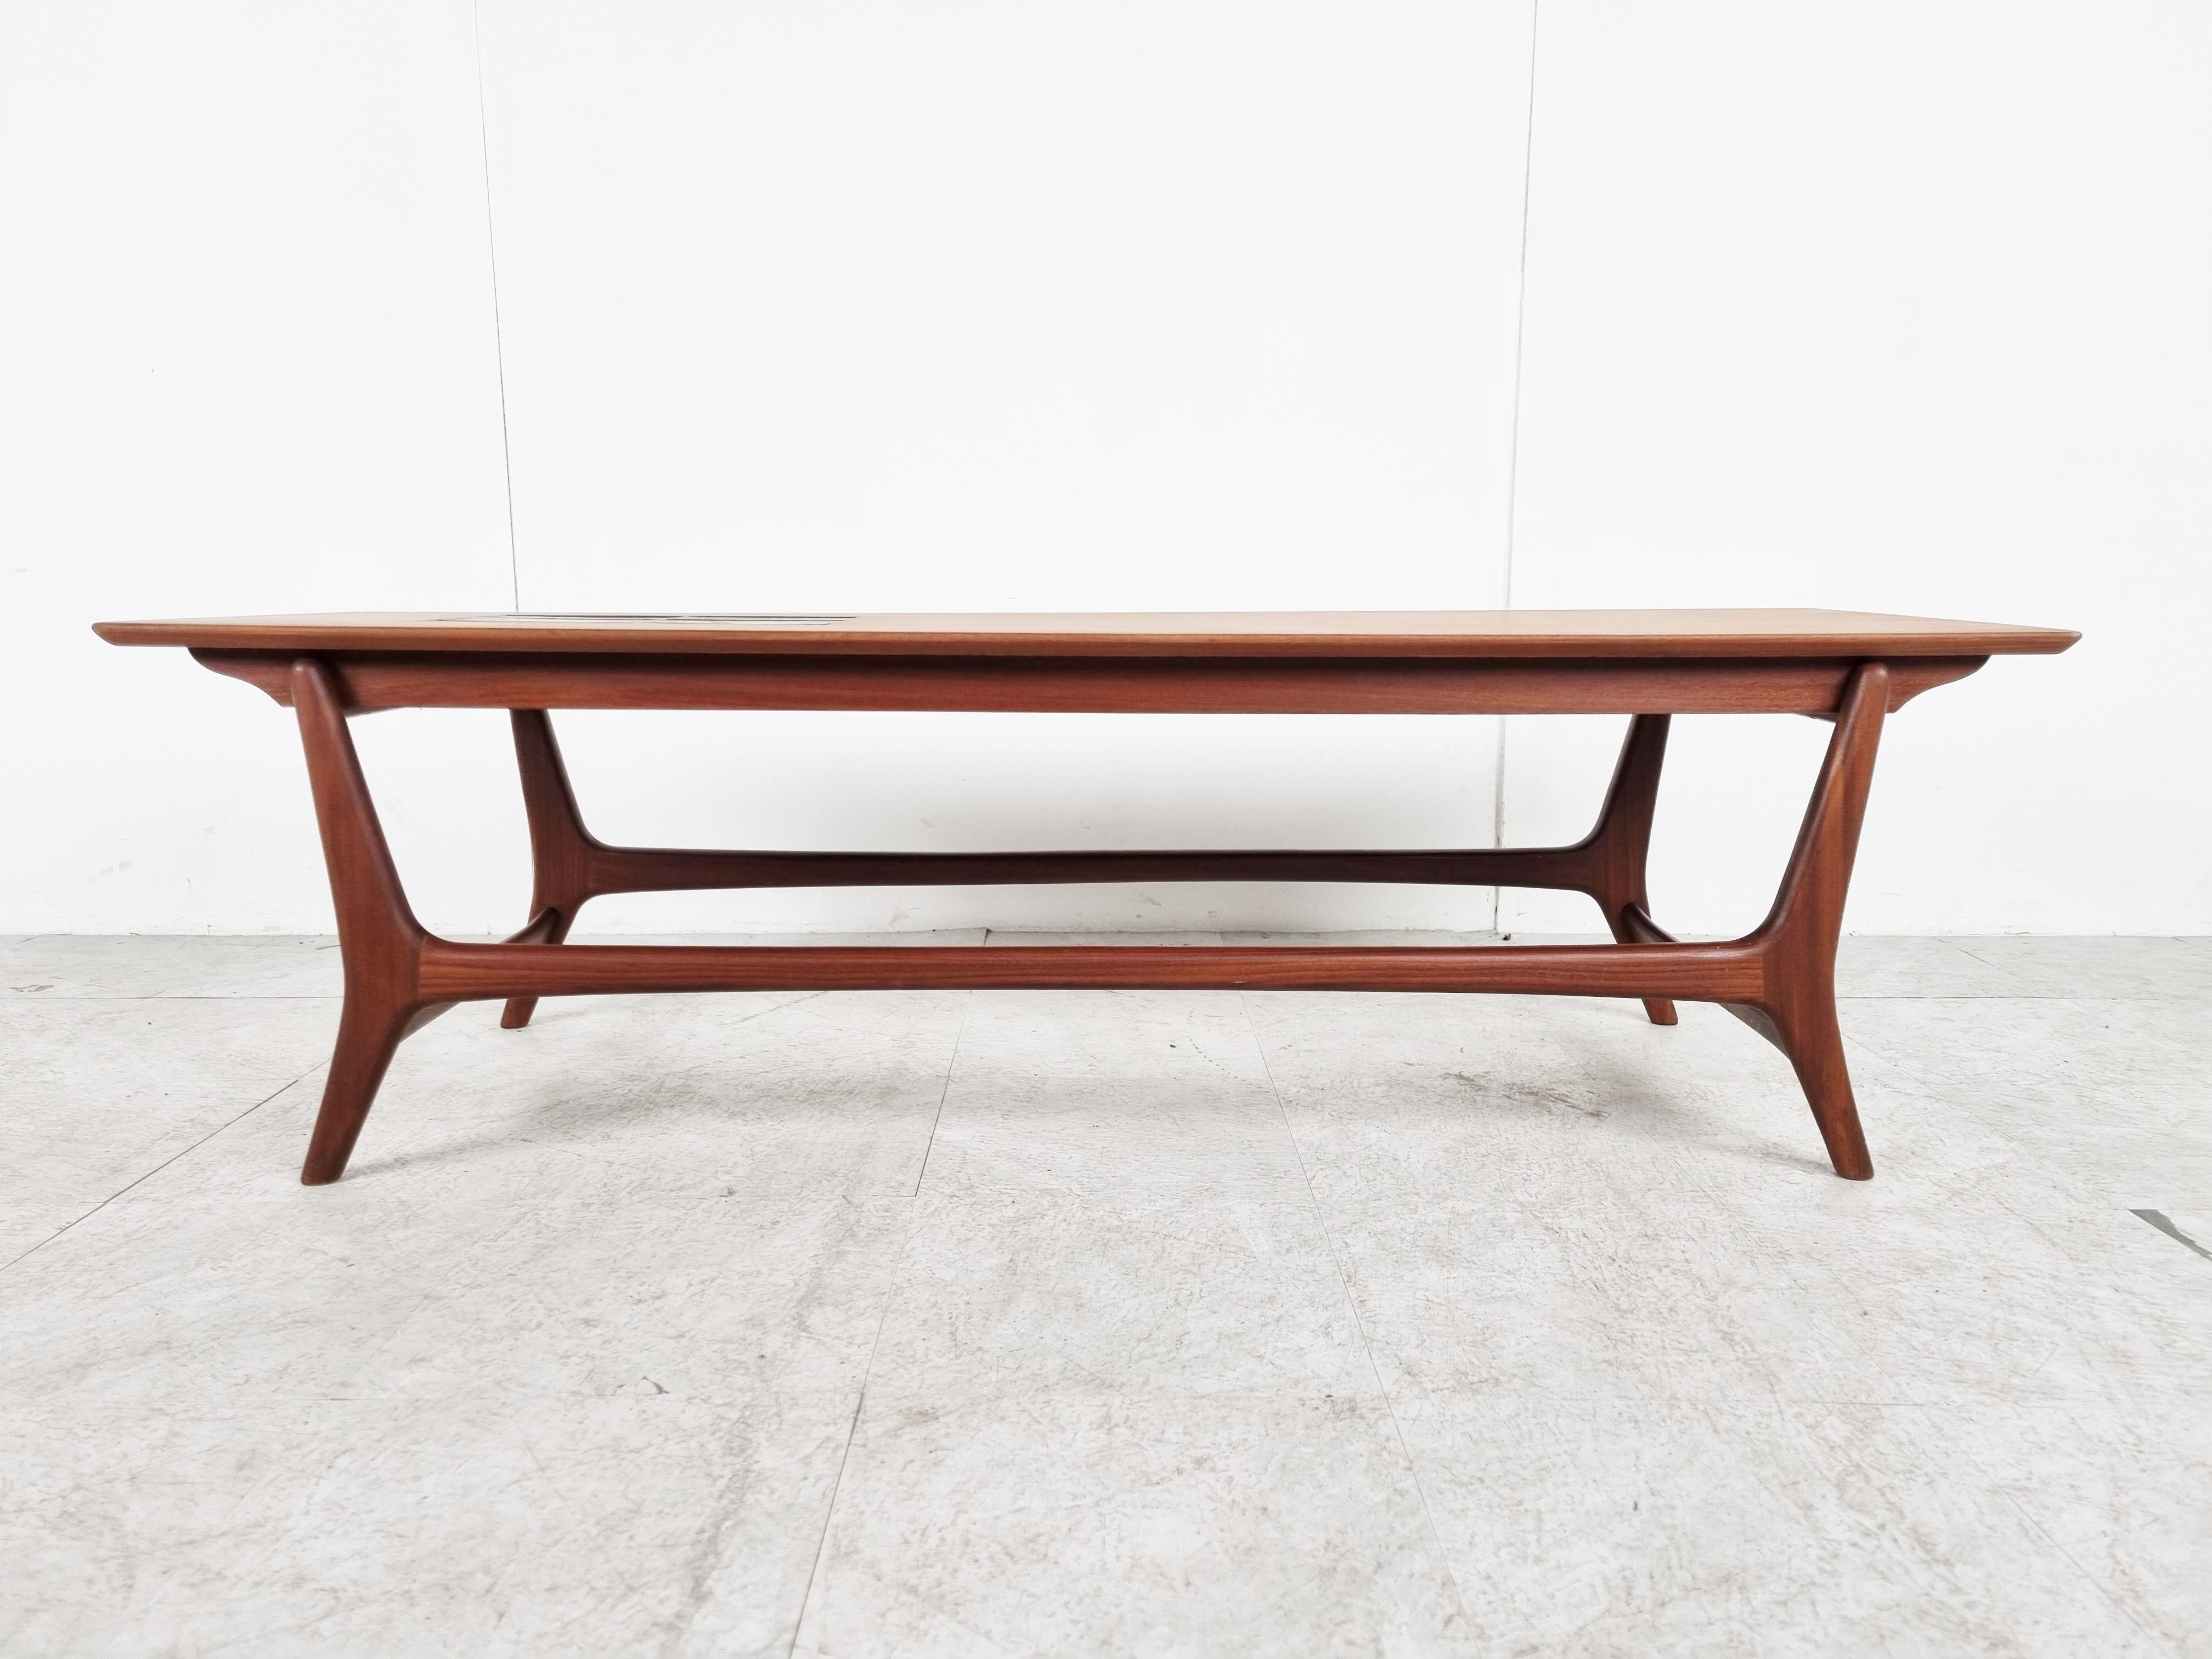 Mid-20th Century Organic Coffee Table by Louis Van Teeffelen for WEBE, The Netherlands, 1960s